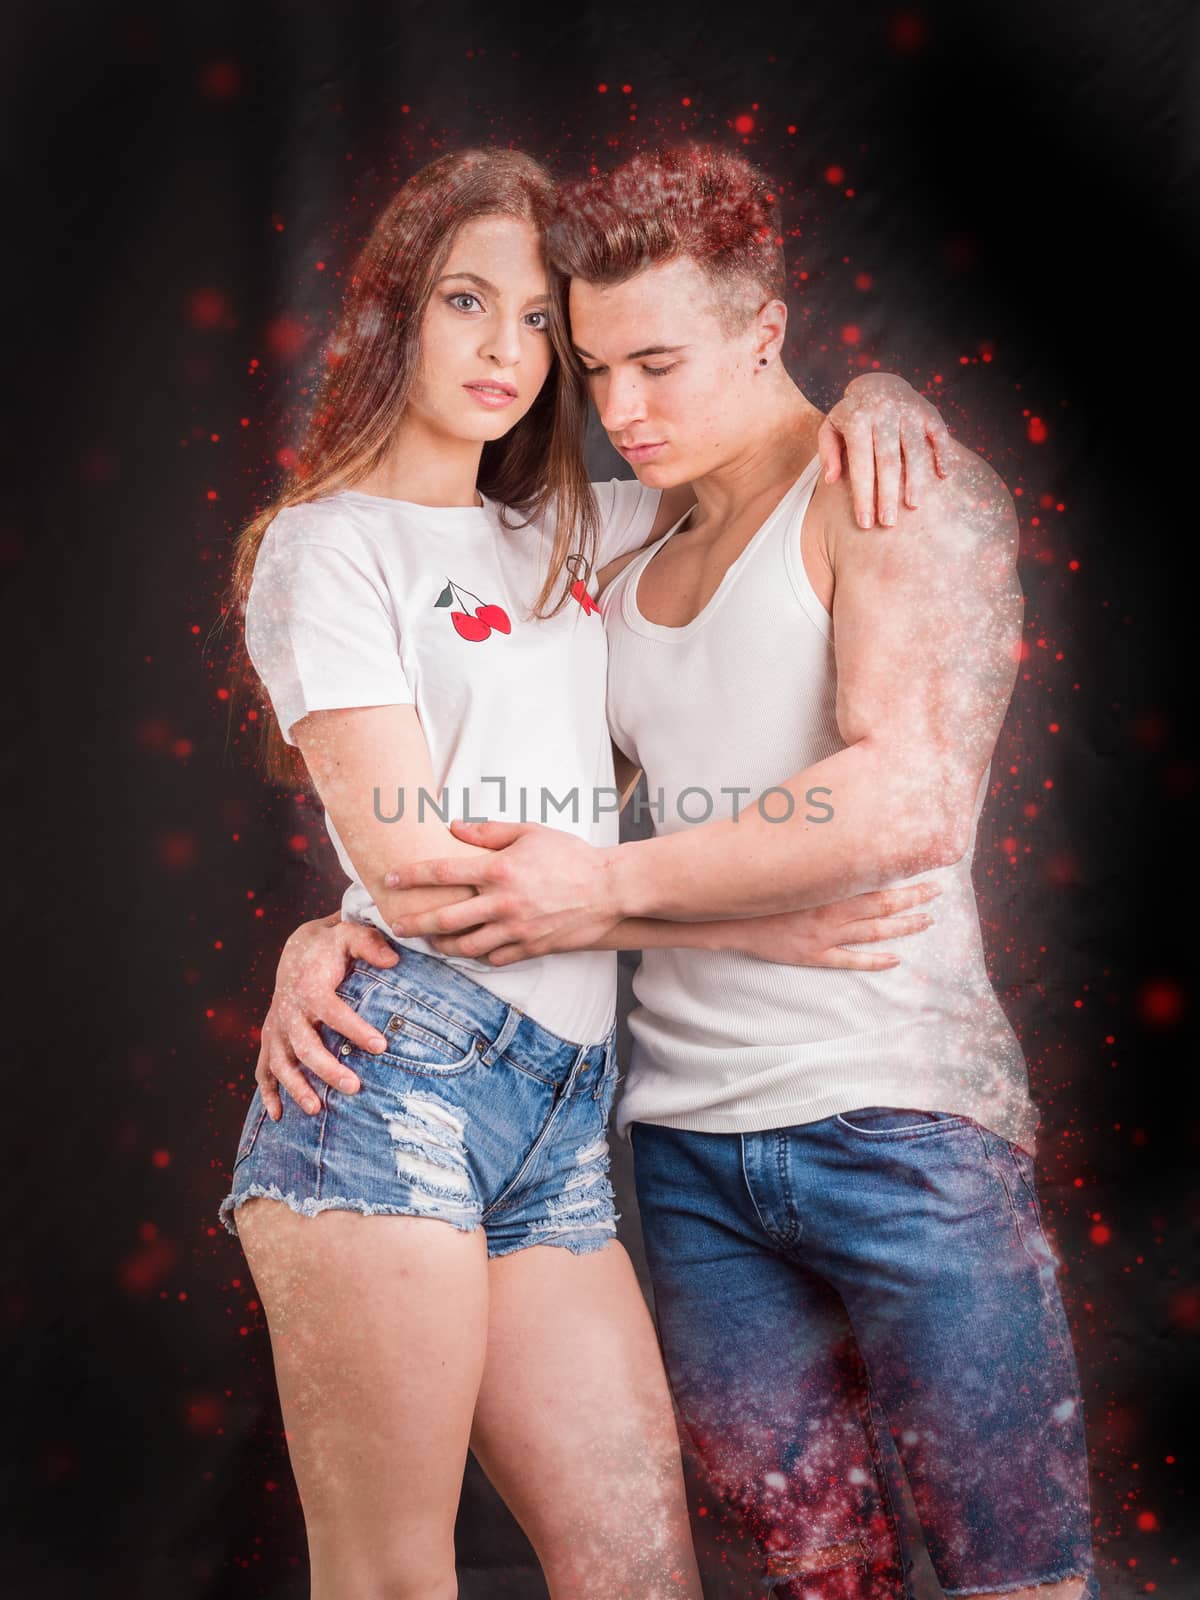 Romantic couple embracing in studio shot, man is muscular, woman is wearing denim shorts and white t-shirt, girl is looking at camera